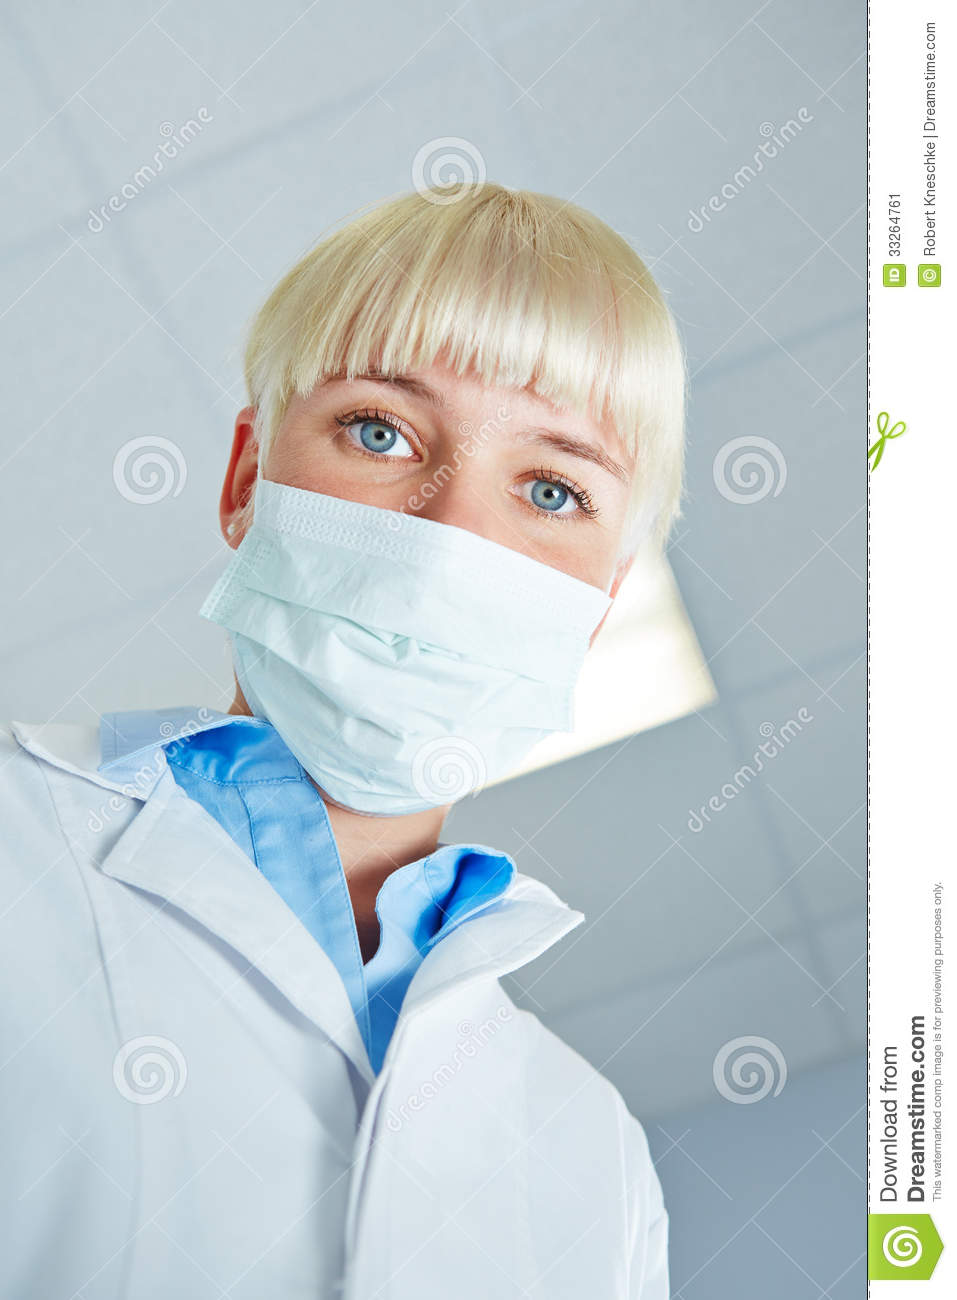 Portrait Of Female Dentist With Surgical Mask Stock Image   Image